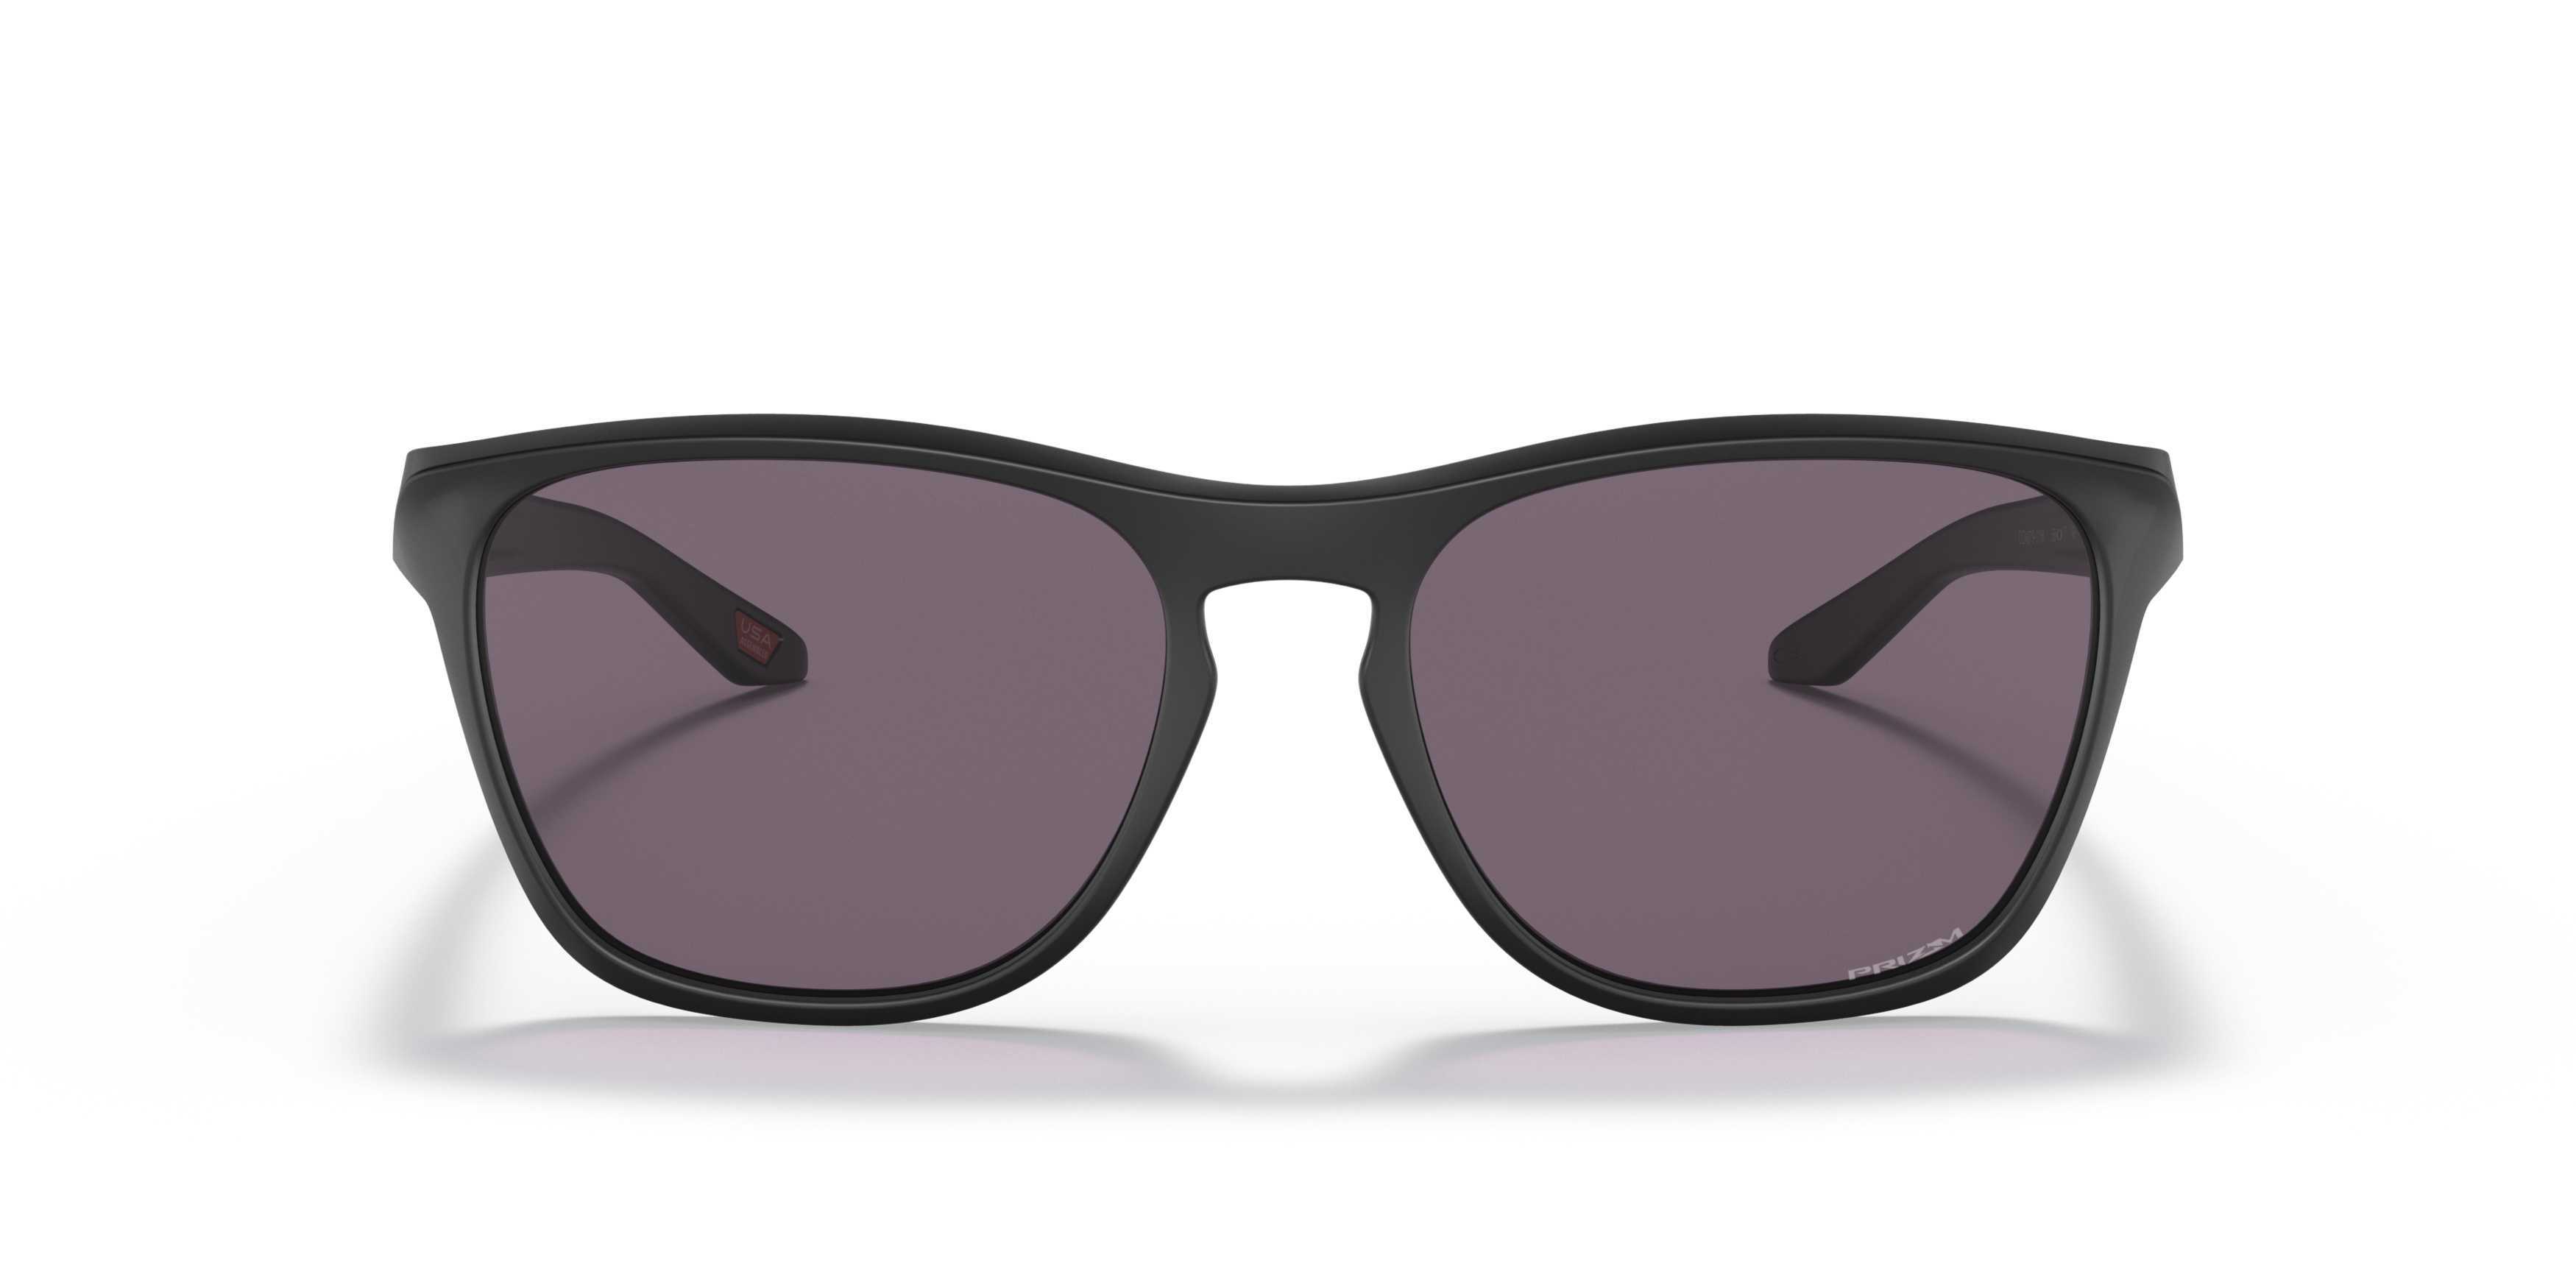 [products.image.front] OAKLEY OO9479 947901